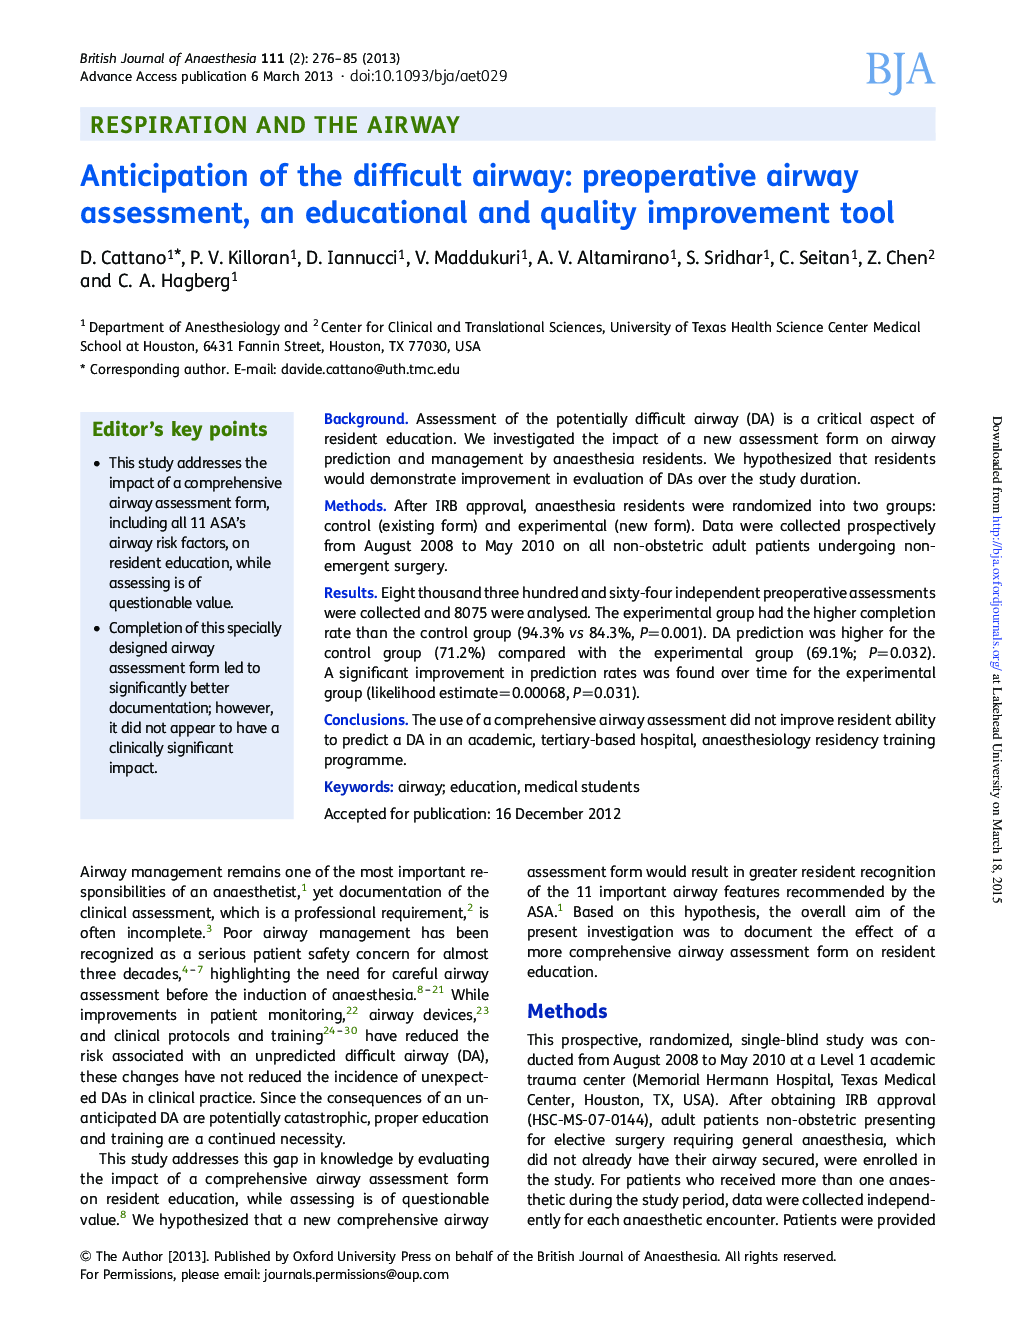 Anticipation of the difficult airway: preoperative airway assessment, an educational and quality improvement tool